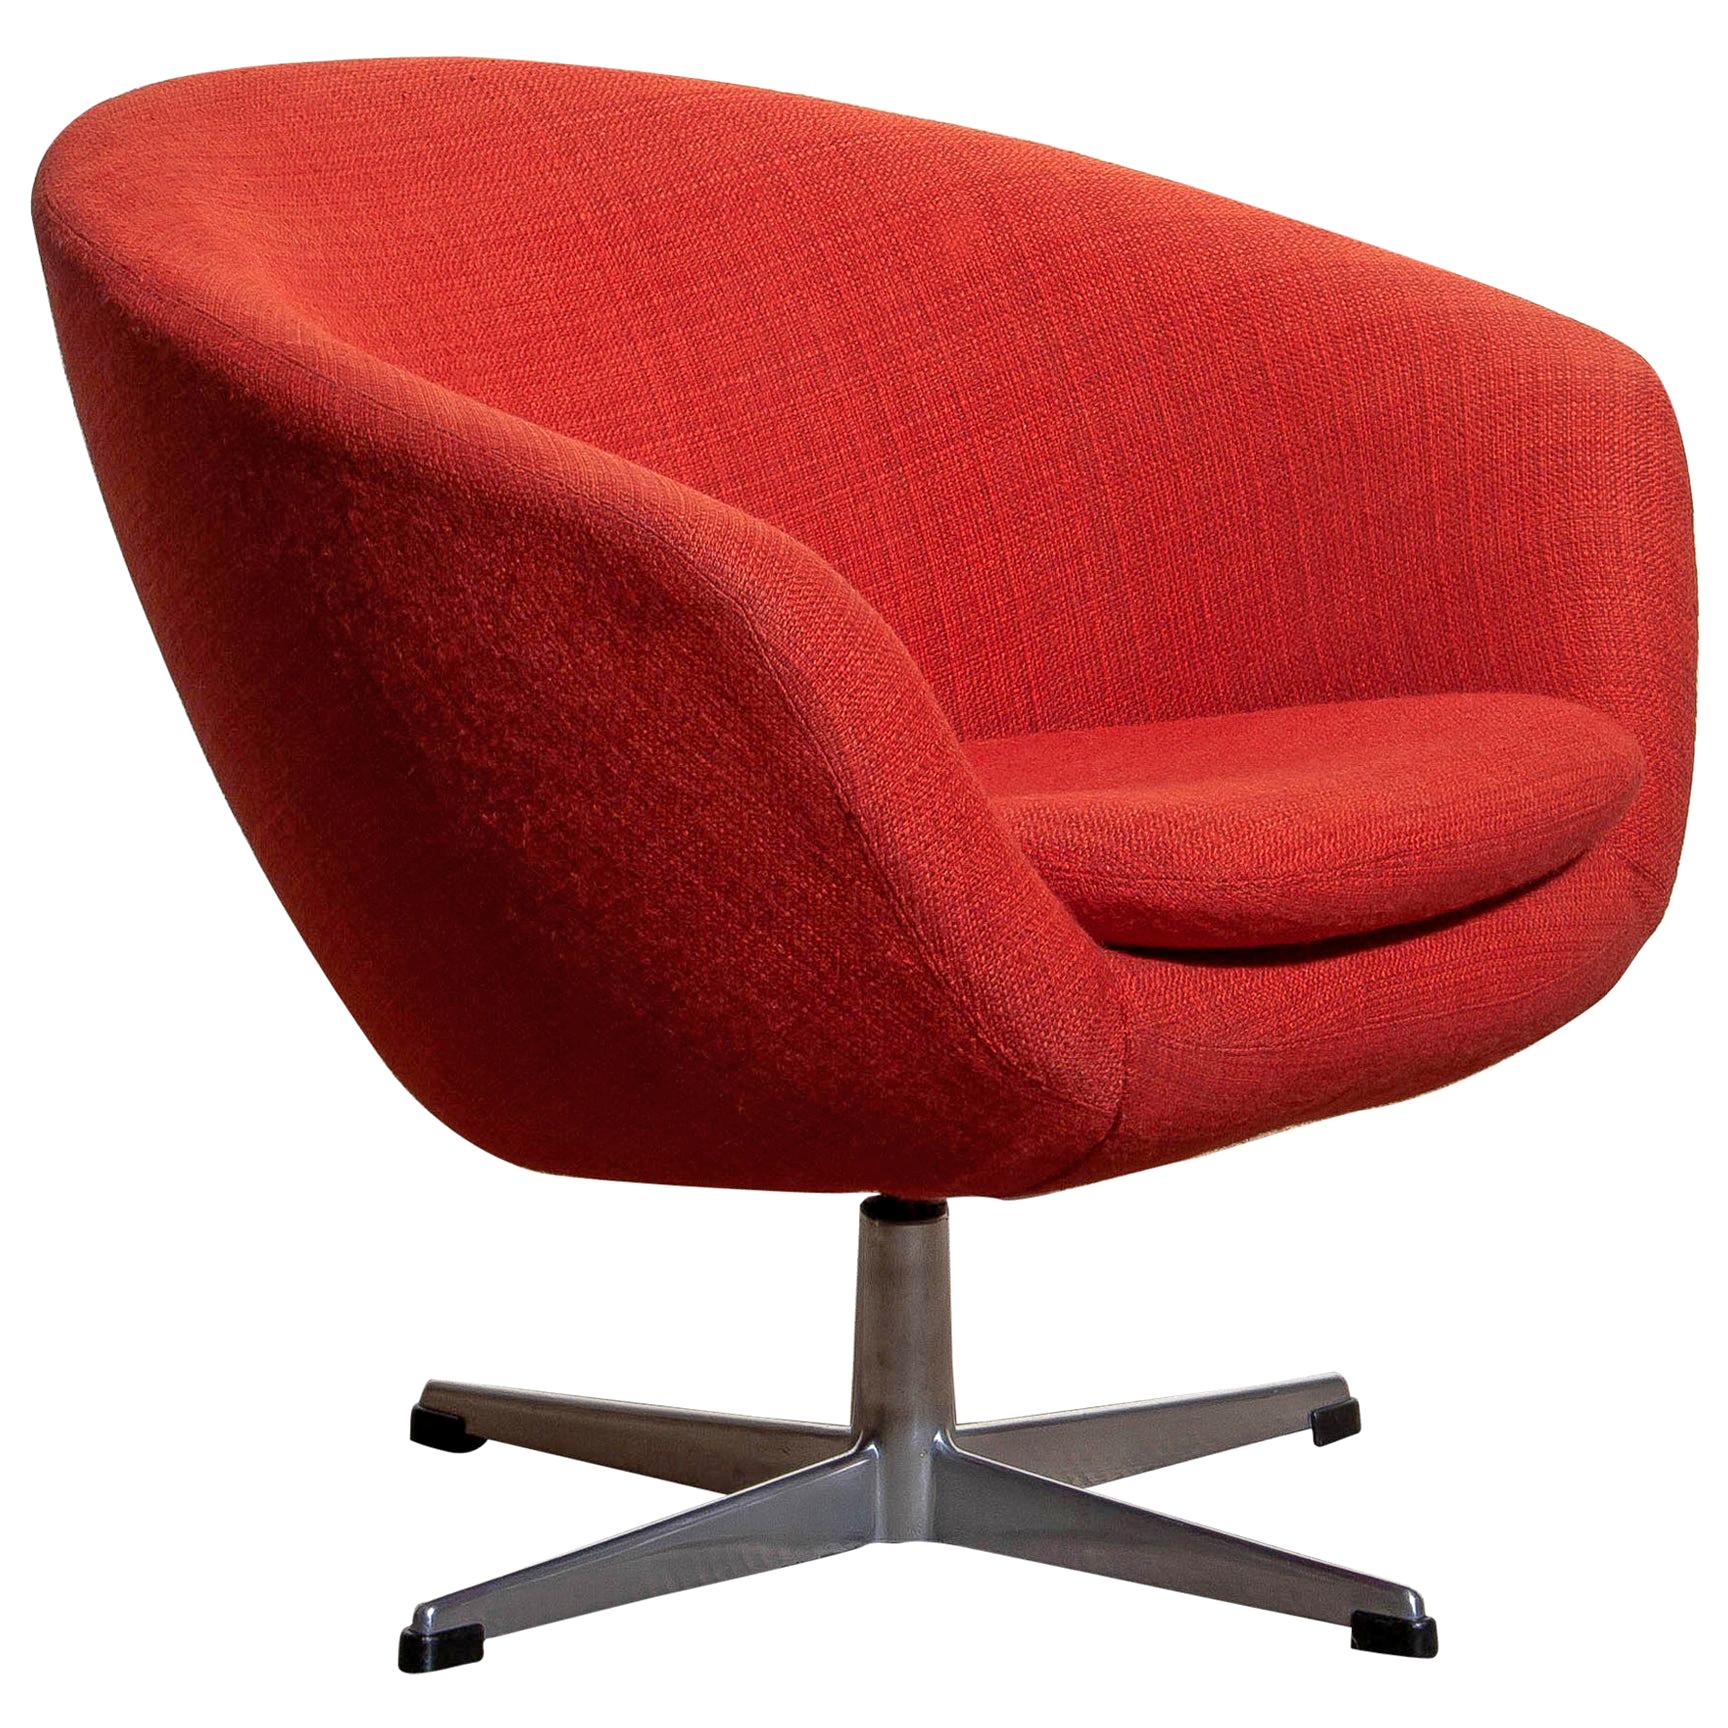 1960s, Swivel Lounge Chair by Carl Eric Klote for Overman, Denmark